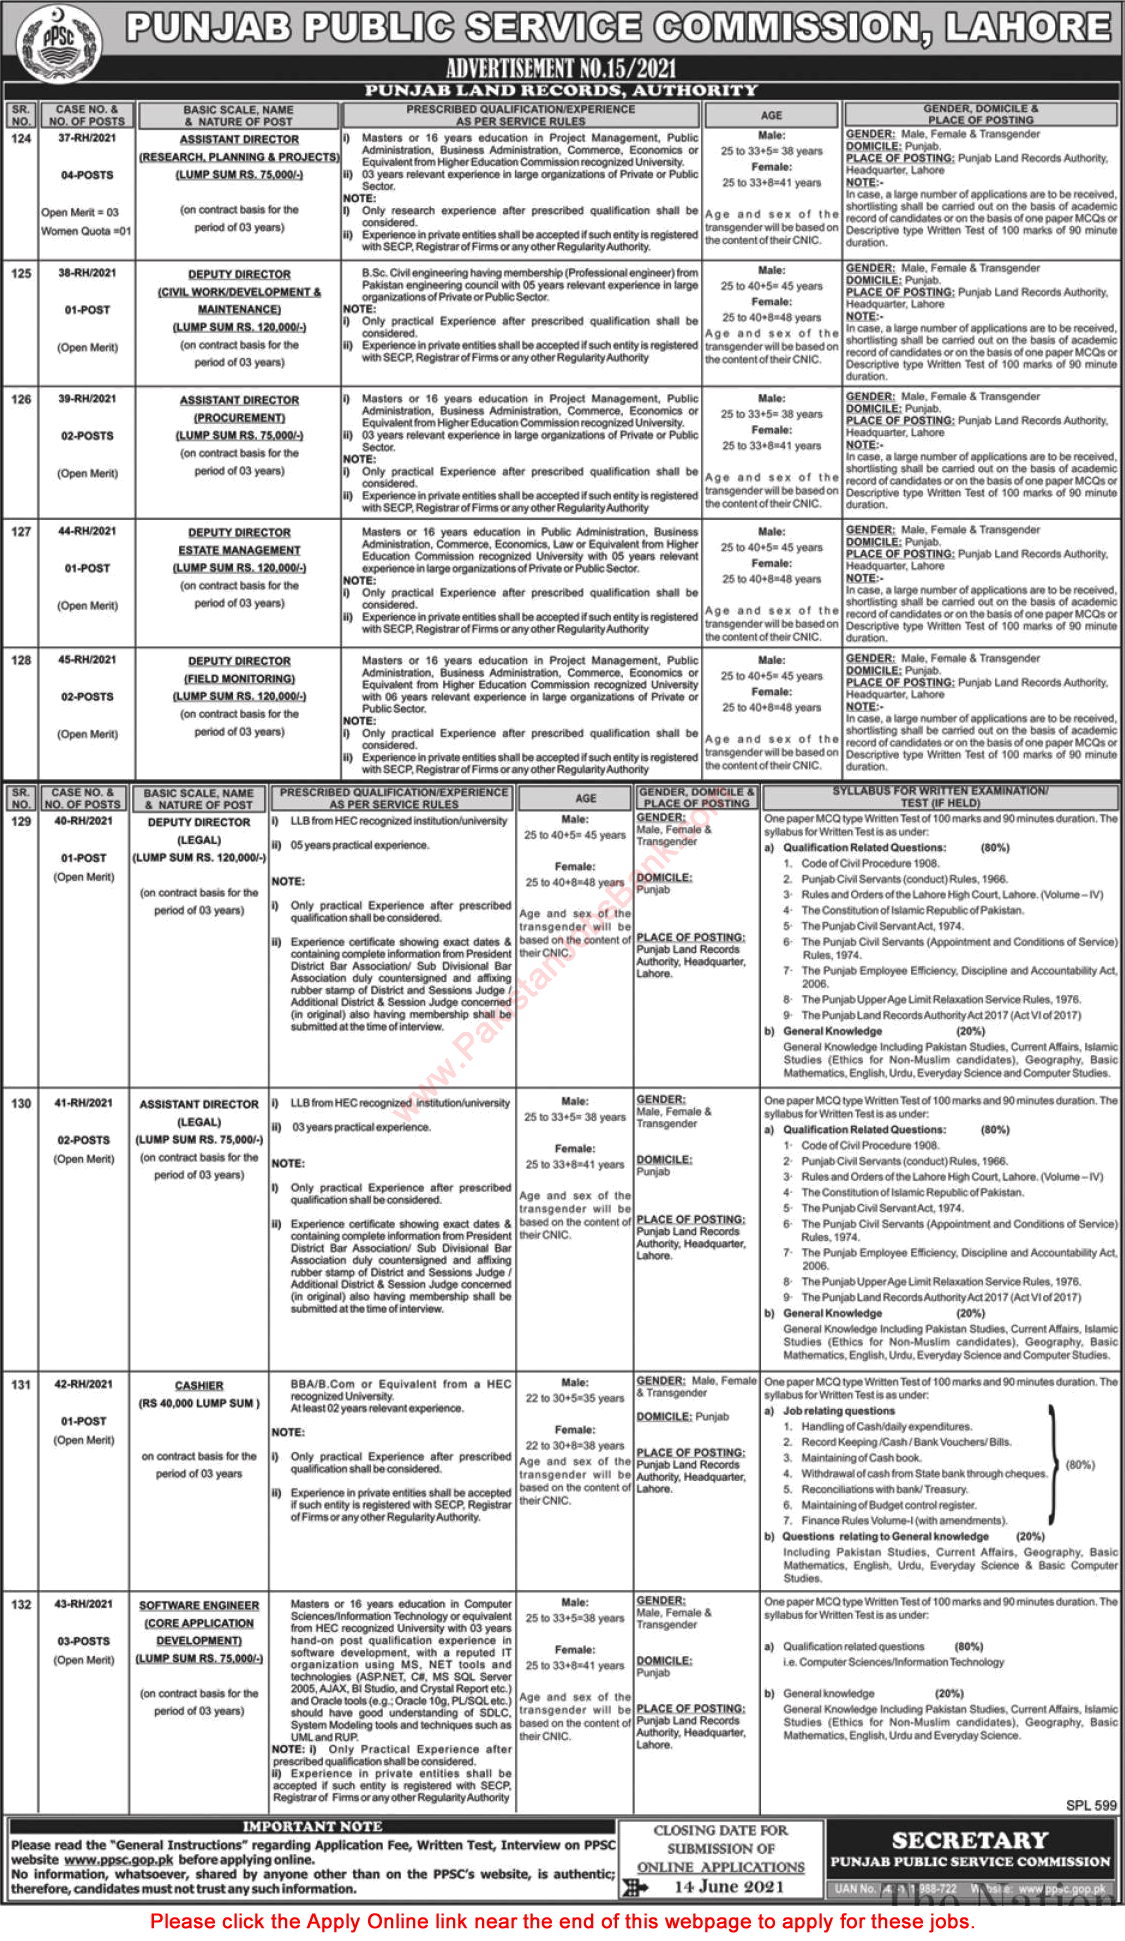 Punjab Land Records Authority Jobs May 2021 June PPSC Apply Online PLRA Latest